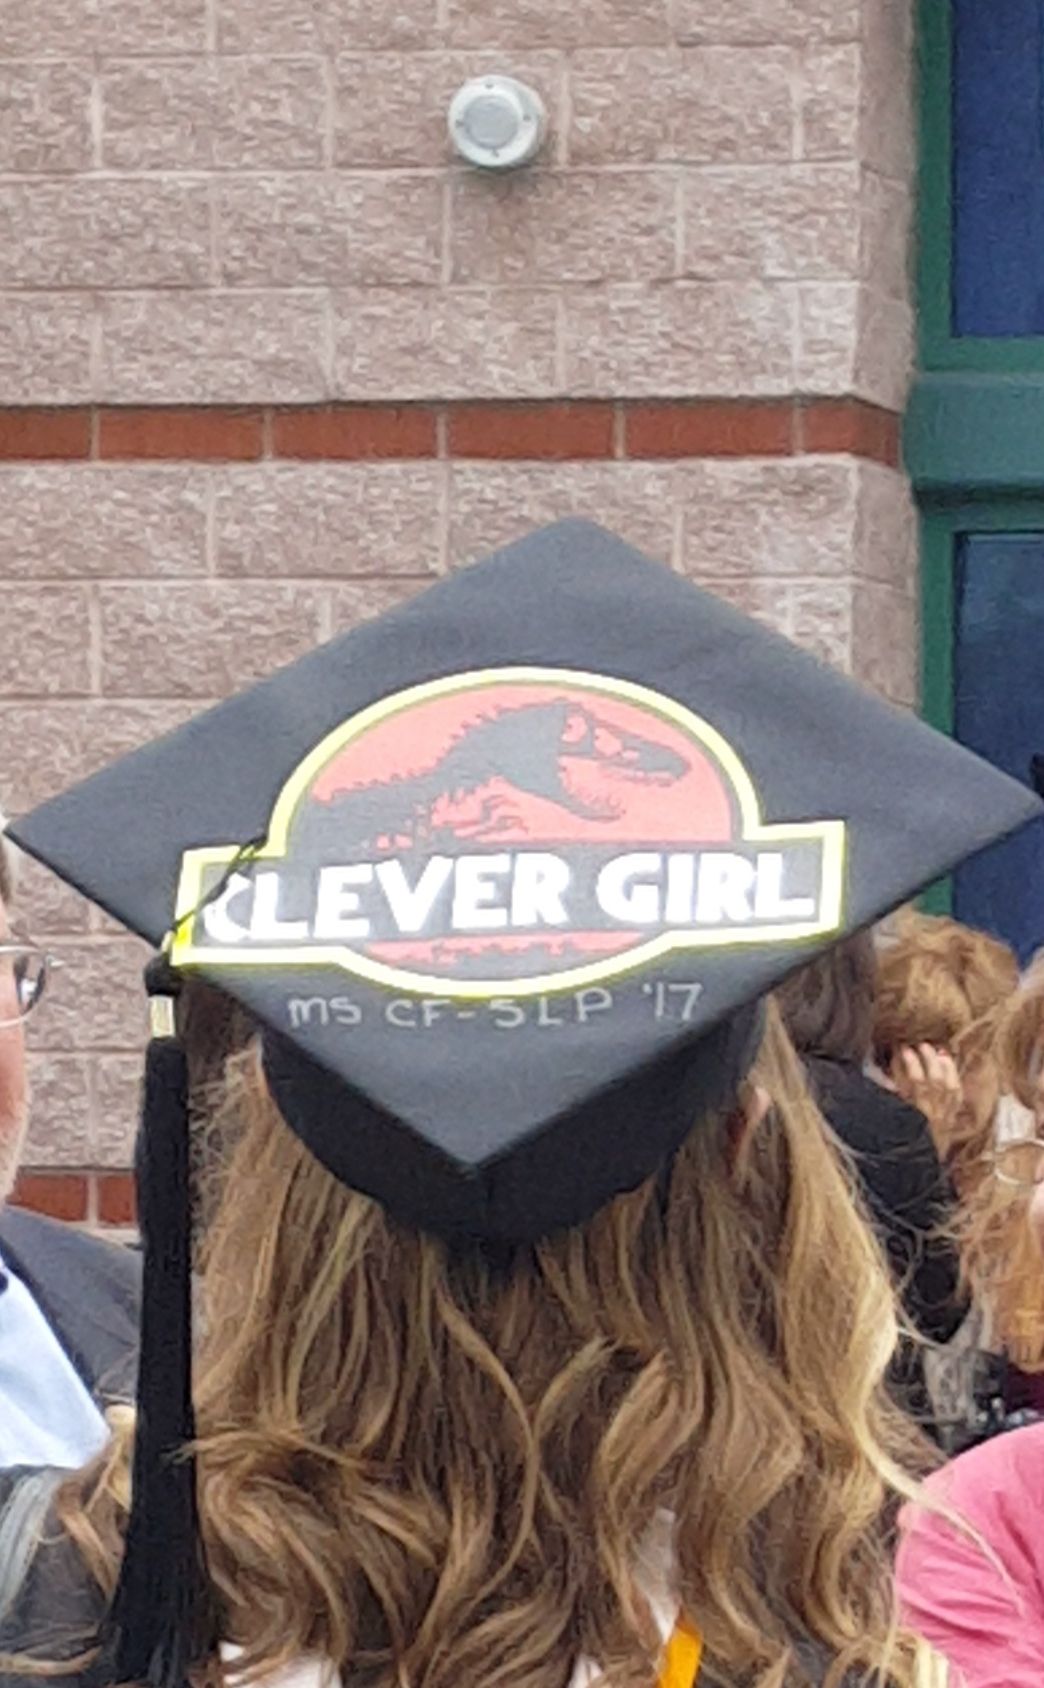 Spotted at my brother's graduation ceremony